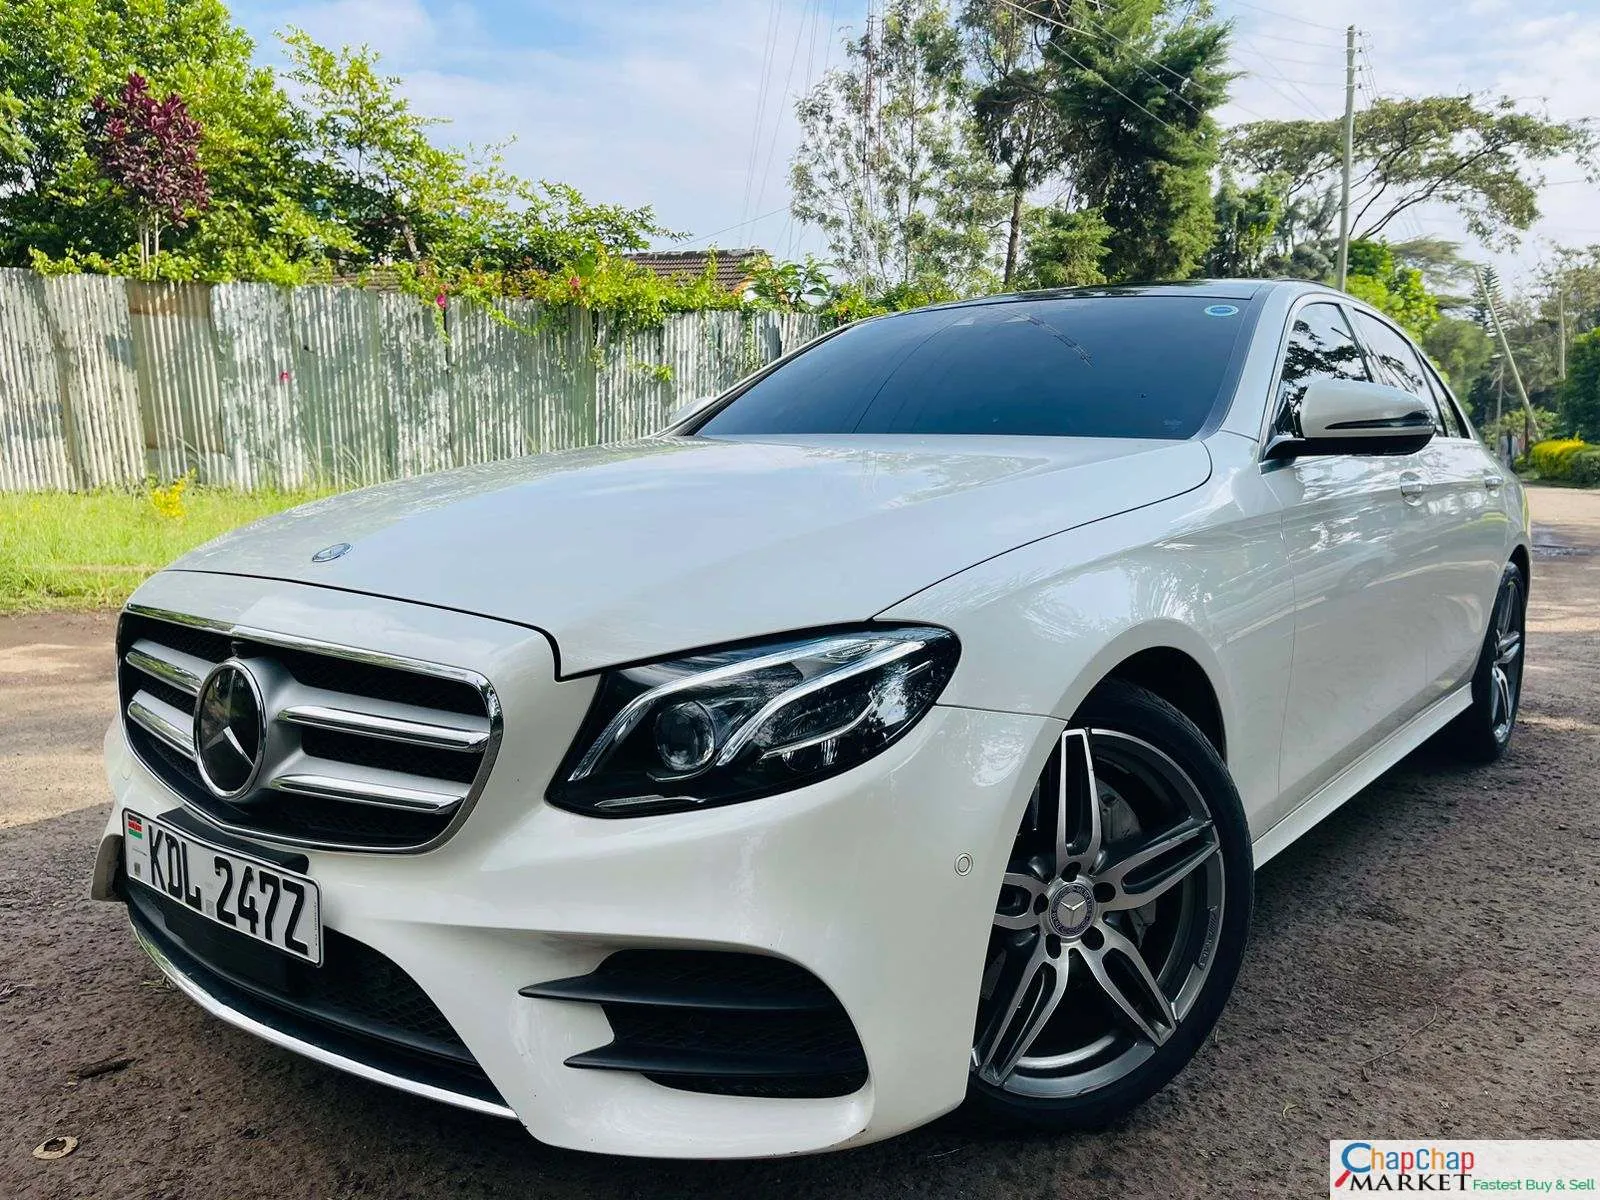 Mercedes Benz E250 for sale in Kenya Cheapest You Pay 30% DEPOSIT Trade in OK EXCLUSIVE hire purchase installments 2017 panoramic